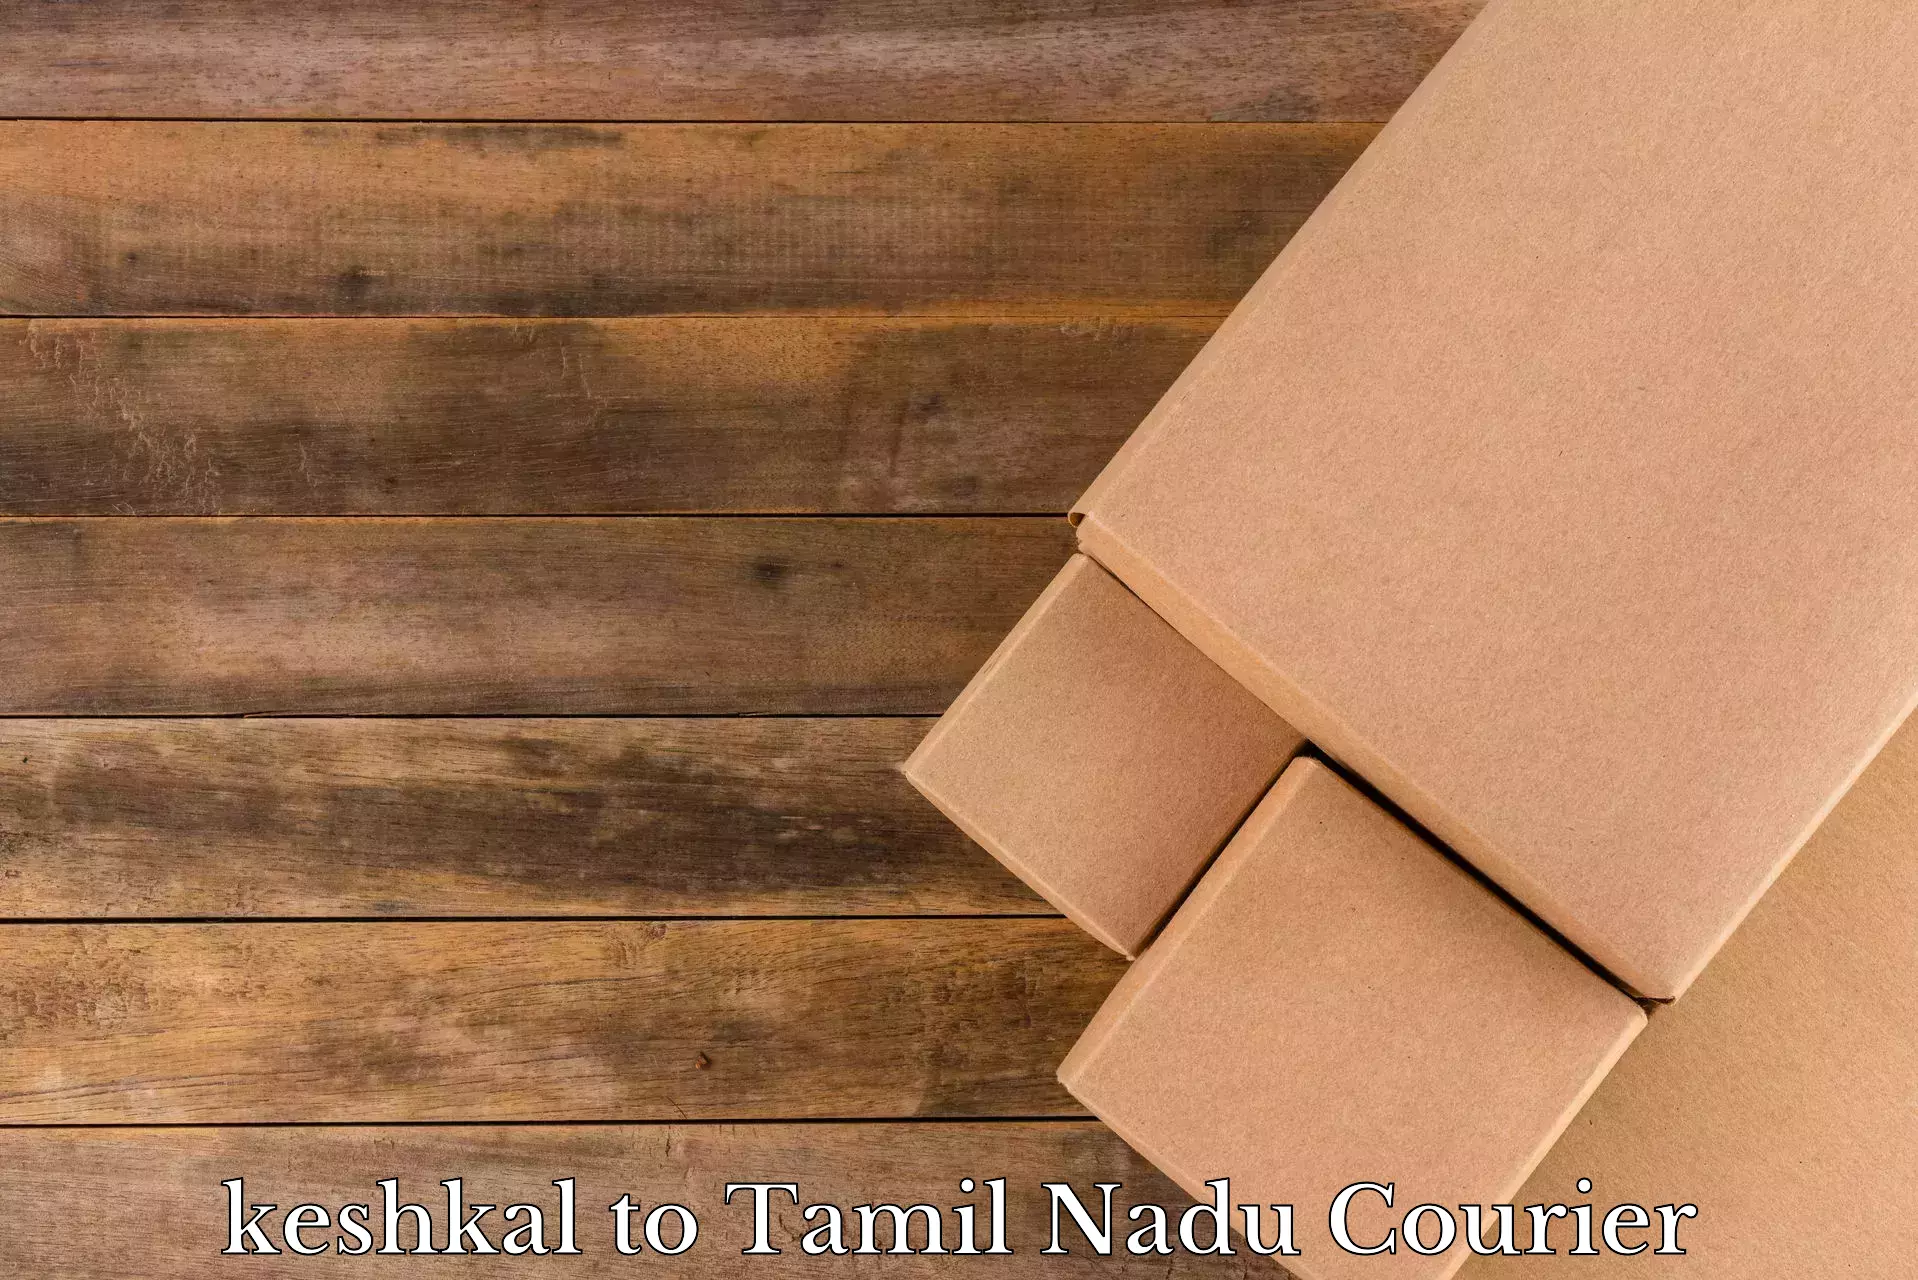 Tailored moving services keshkal to Coimbatore